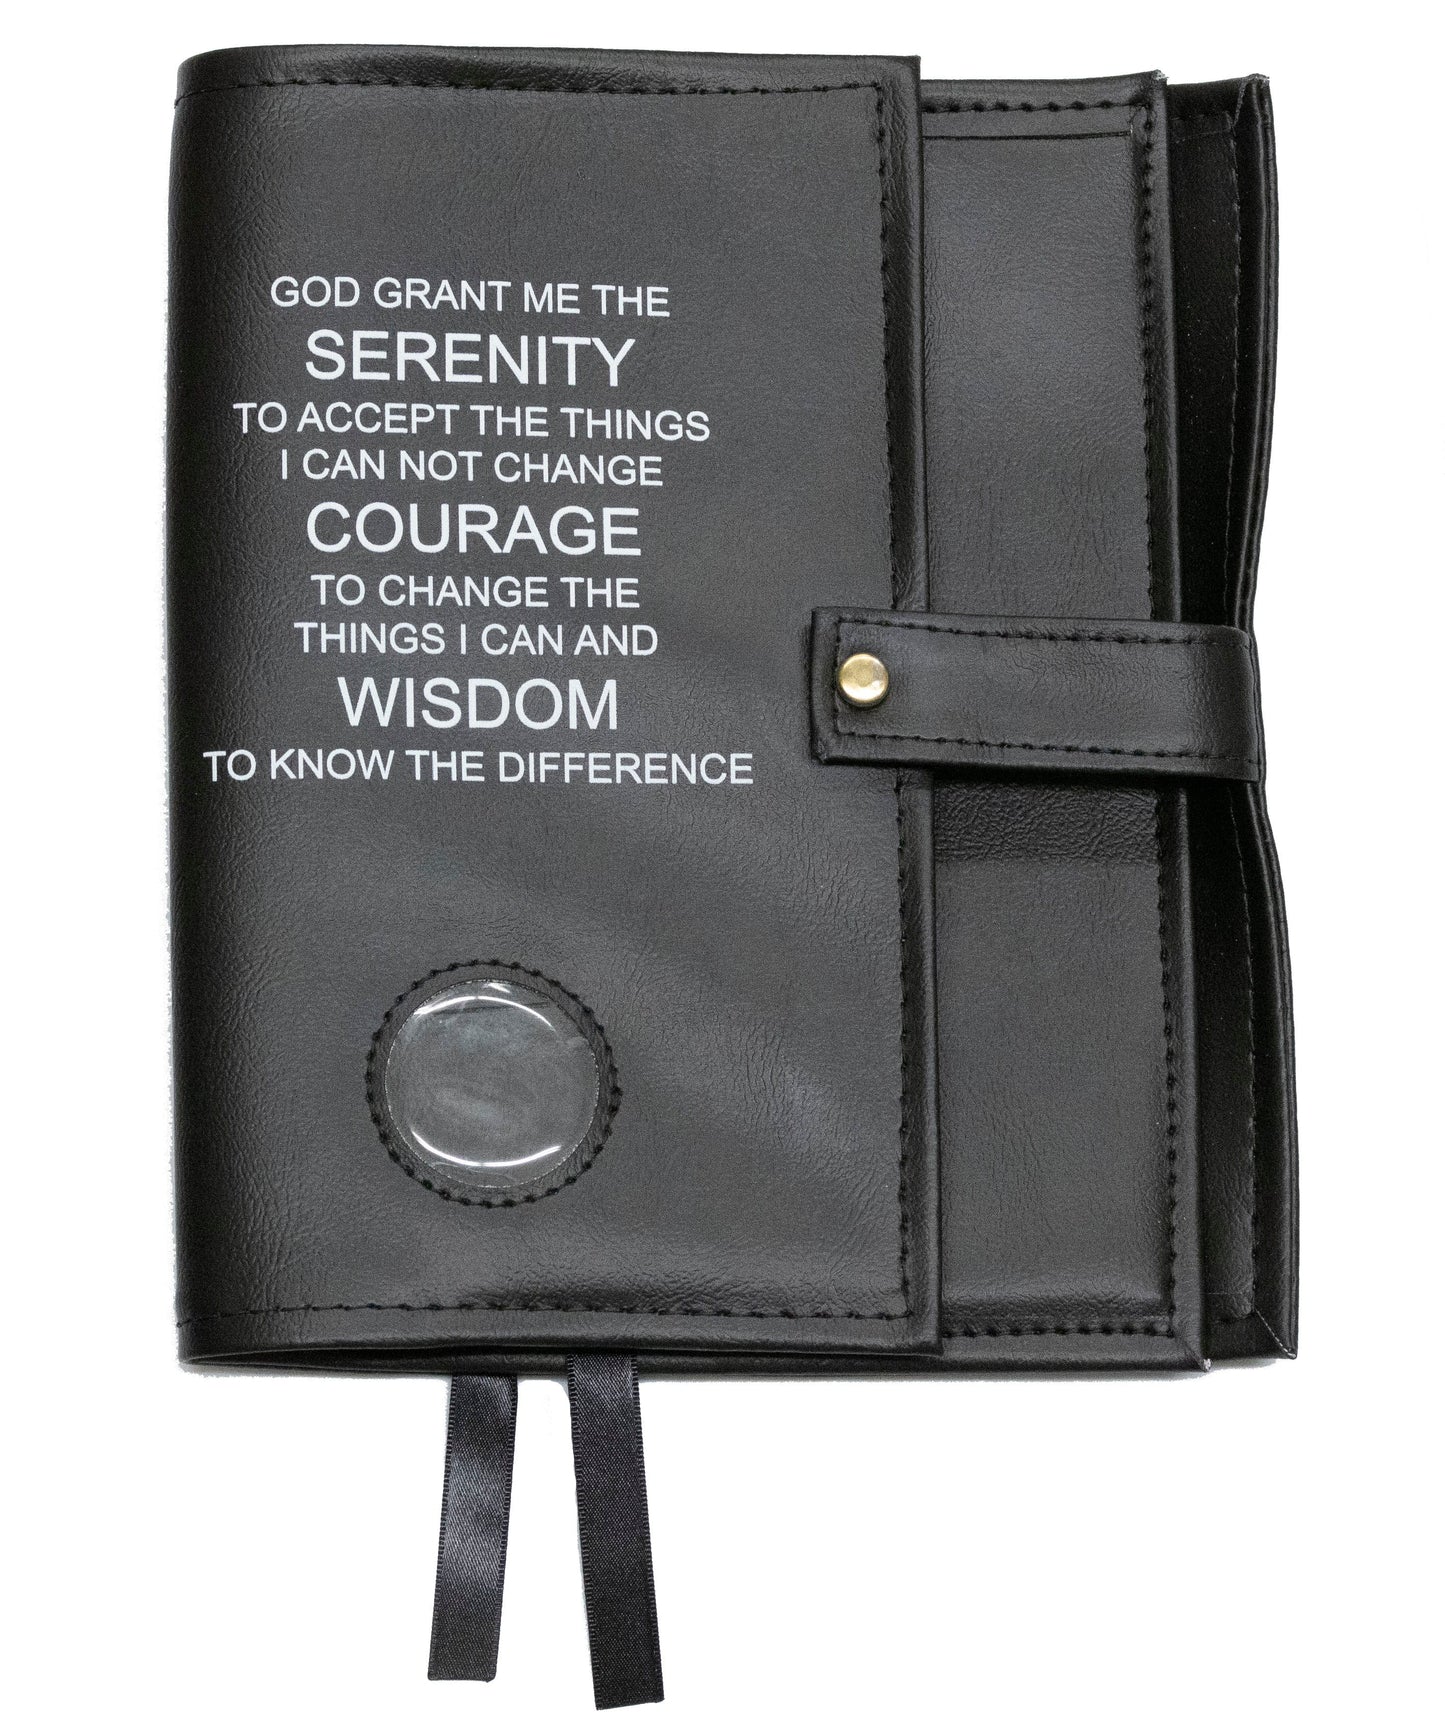 AA Black Double Book Cover With The Serenity Prayer, With Sobriety Chip Holder